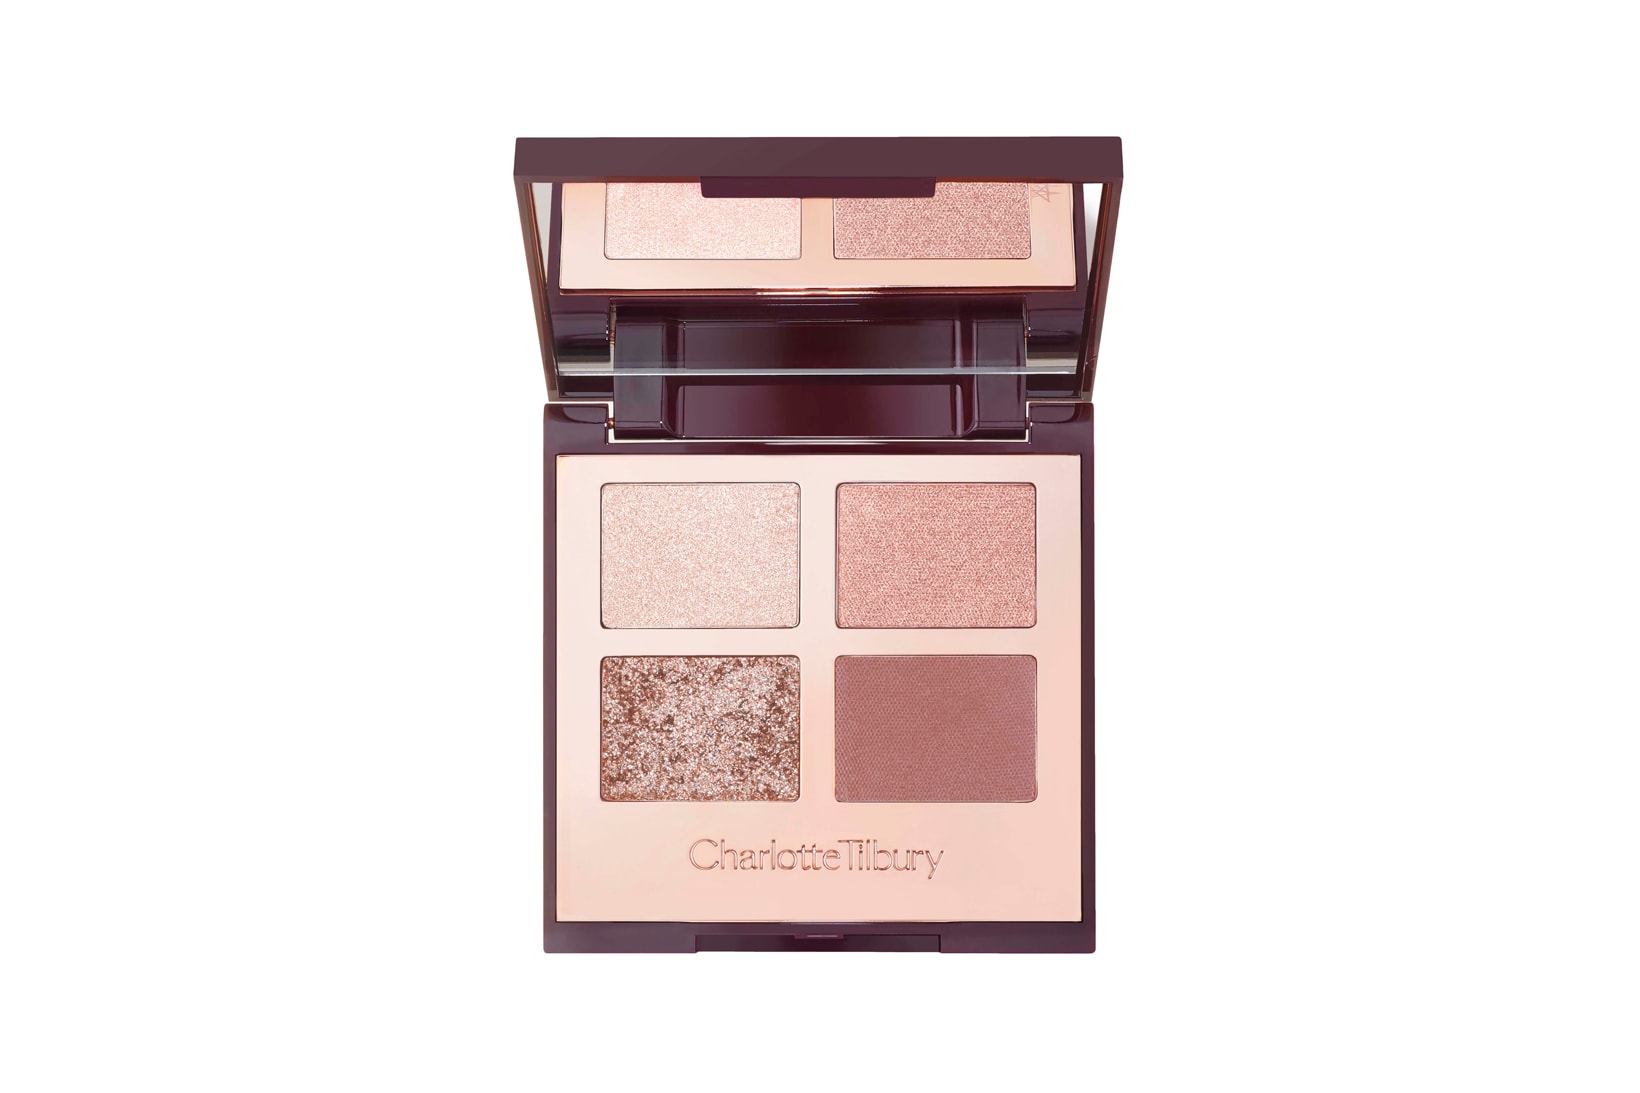 Charlotte Tilbury Beauty Filter Collection Bigger Brighter Eyes Eyeshadow Palettes Transform-Eyes